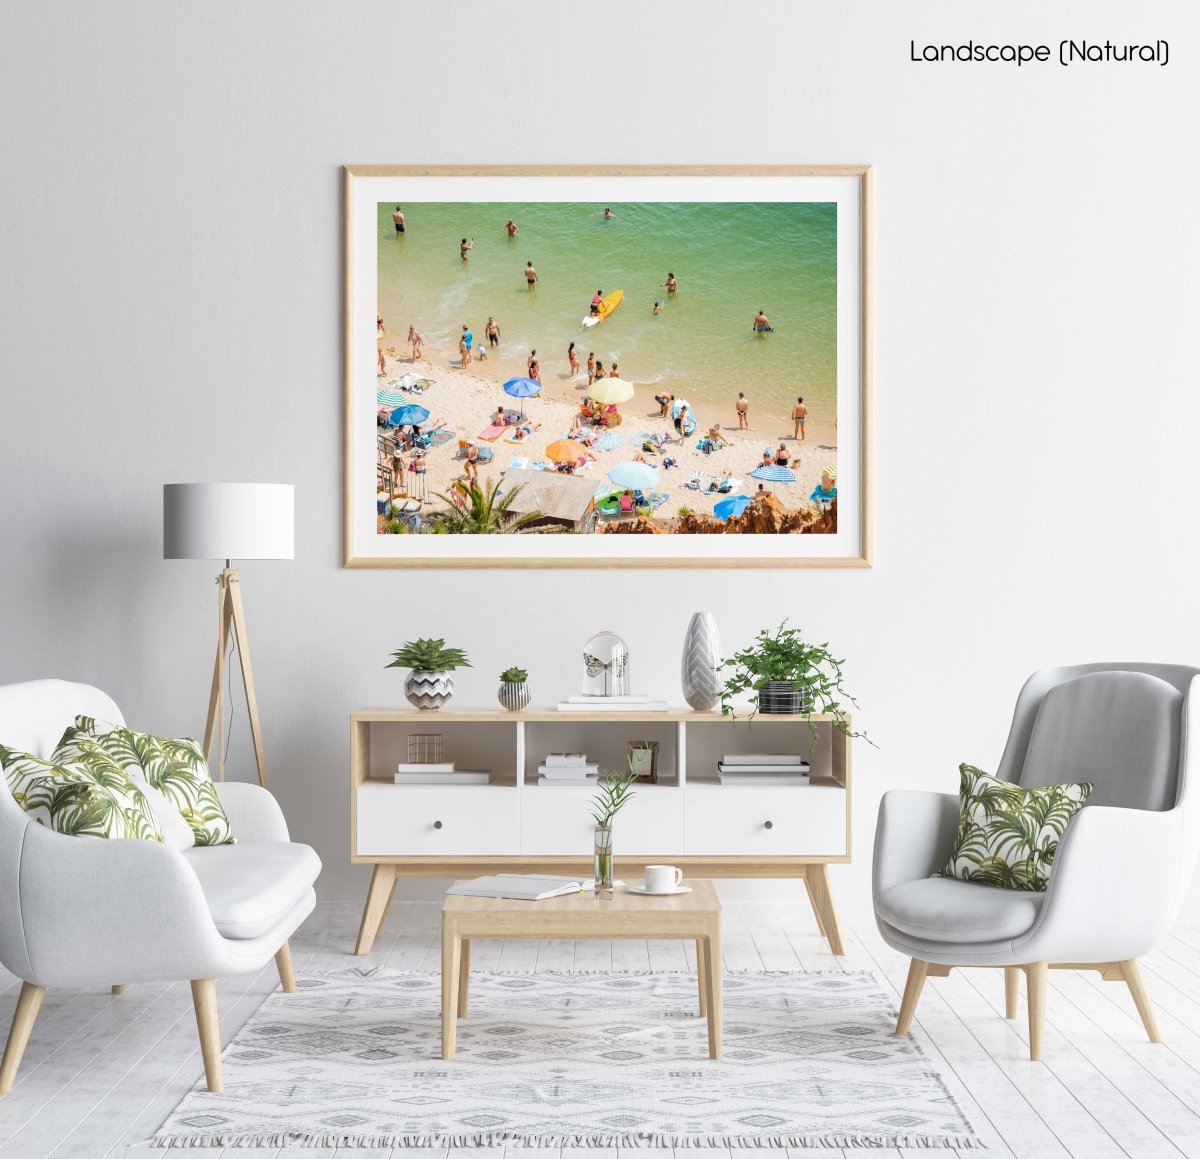 Colorful boards, people, water and sand on Praia do Camilo Lagos in a natural fine art frame